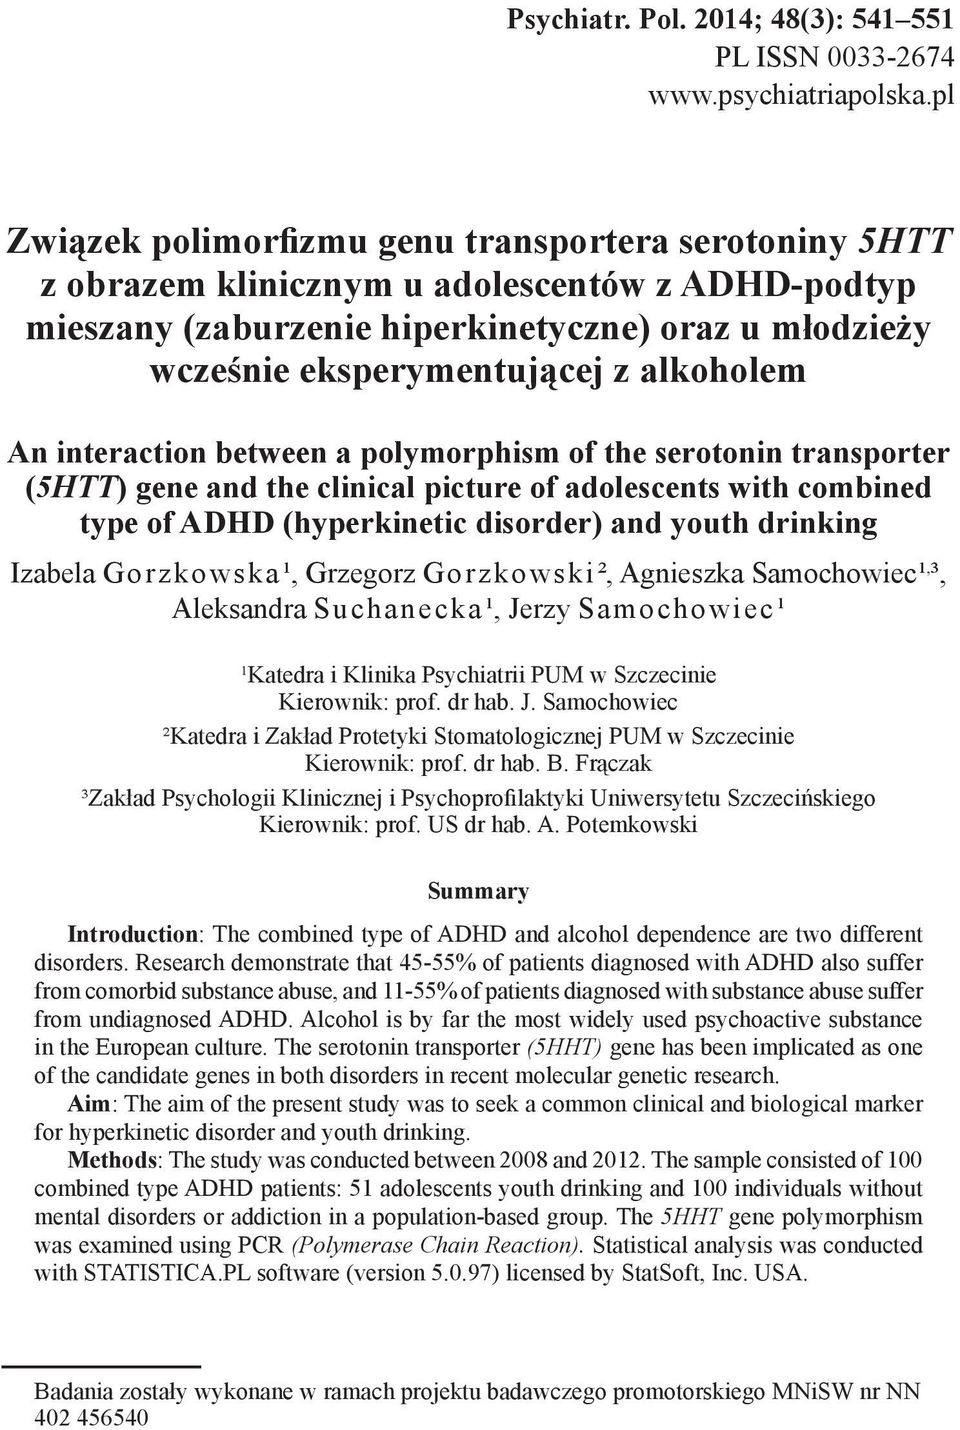 iteractio betwee a polymorphism of the serotoi trasporter (5HTT) gee ad the cliical picture of adolescets with combied type of ADHD (hyperkietic disorder) ad youth drikig Izabela Gorzkowska¹,